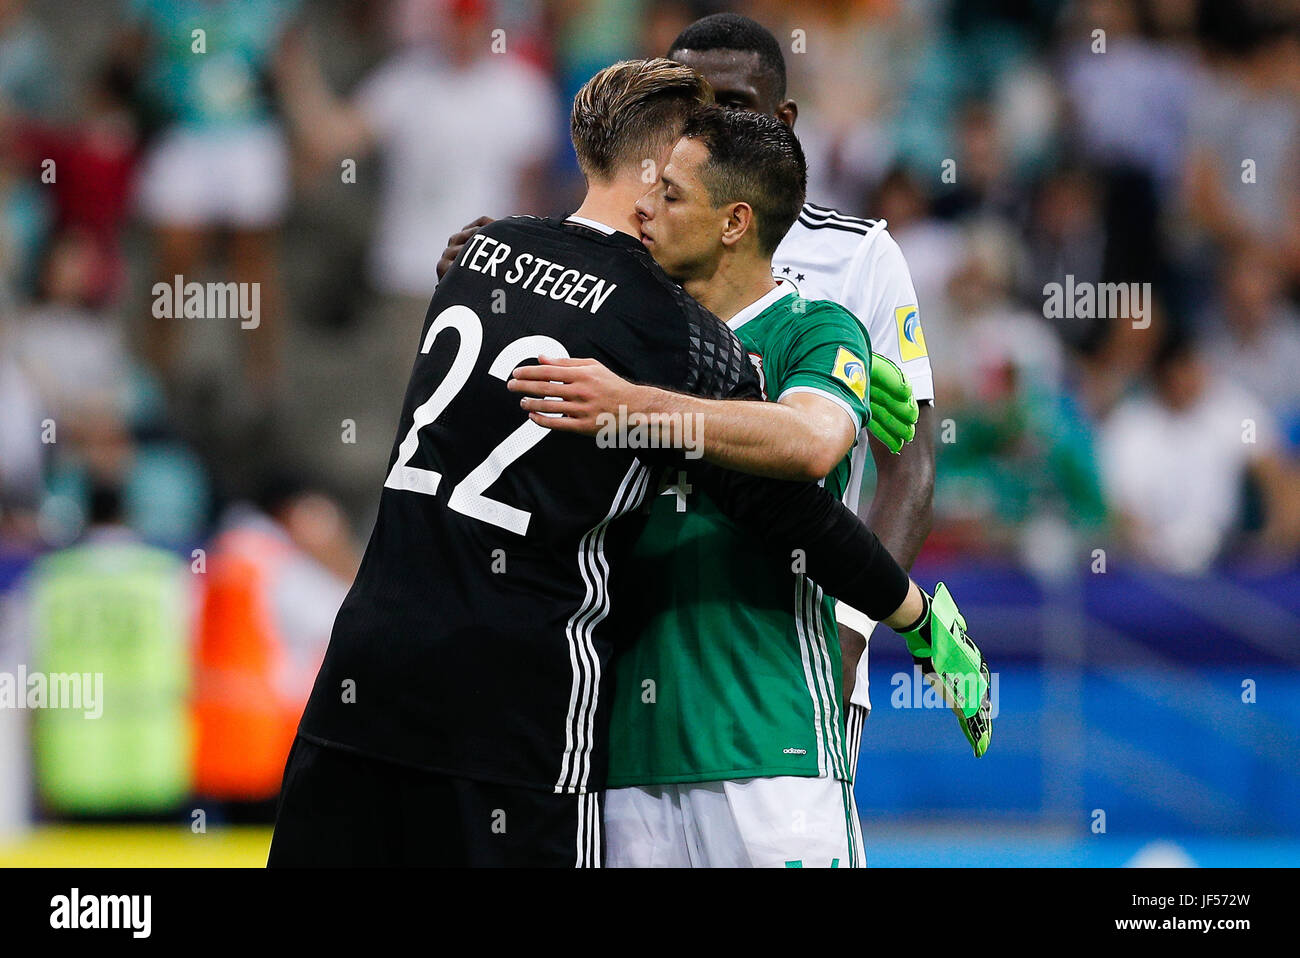 SOCHI, SC - 29.06.2017: GERMANY VS MEXICO - TER STEGEN Germany&#39;s Marc-Andre embraces HERNANDEZ Javier from Mexico after a match between Germany and Mexico in the semifi of the 20172017 FIFA Confederations Cup on Thursday (29th) at the Olympic Stadium in Sochi, Russia (Photo: Marcelo Machado de Melo/Fotoarena) Stock Photo